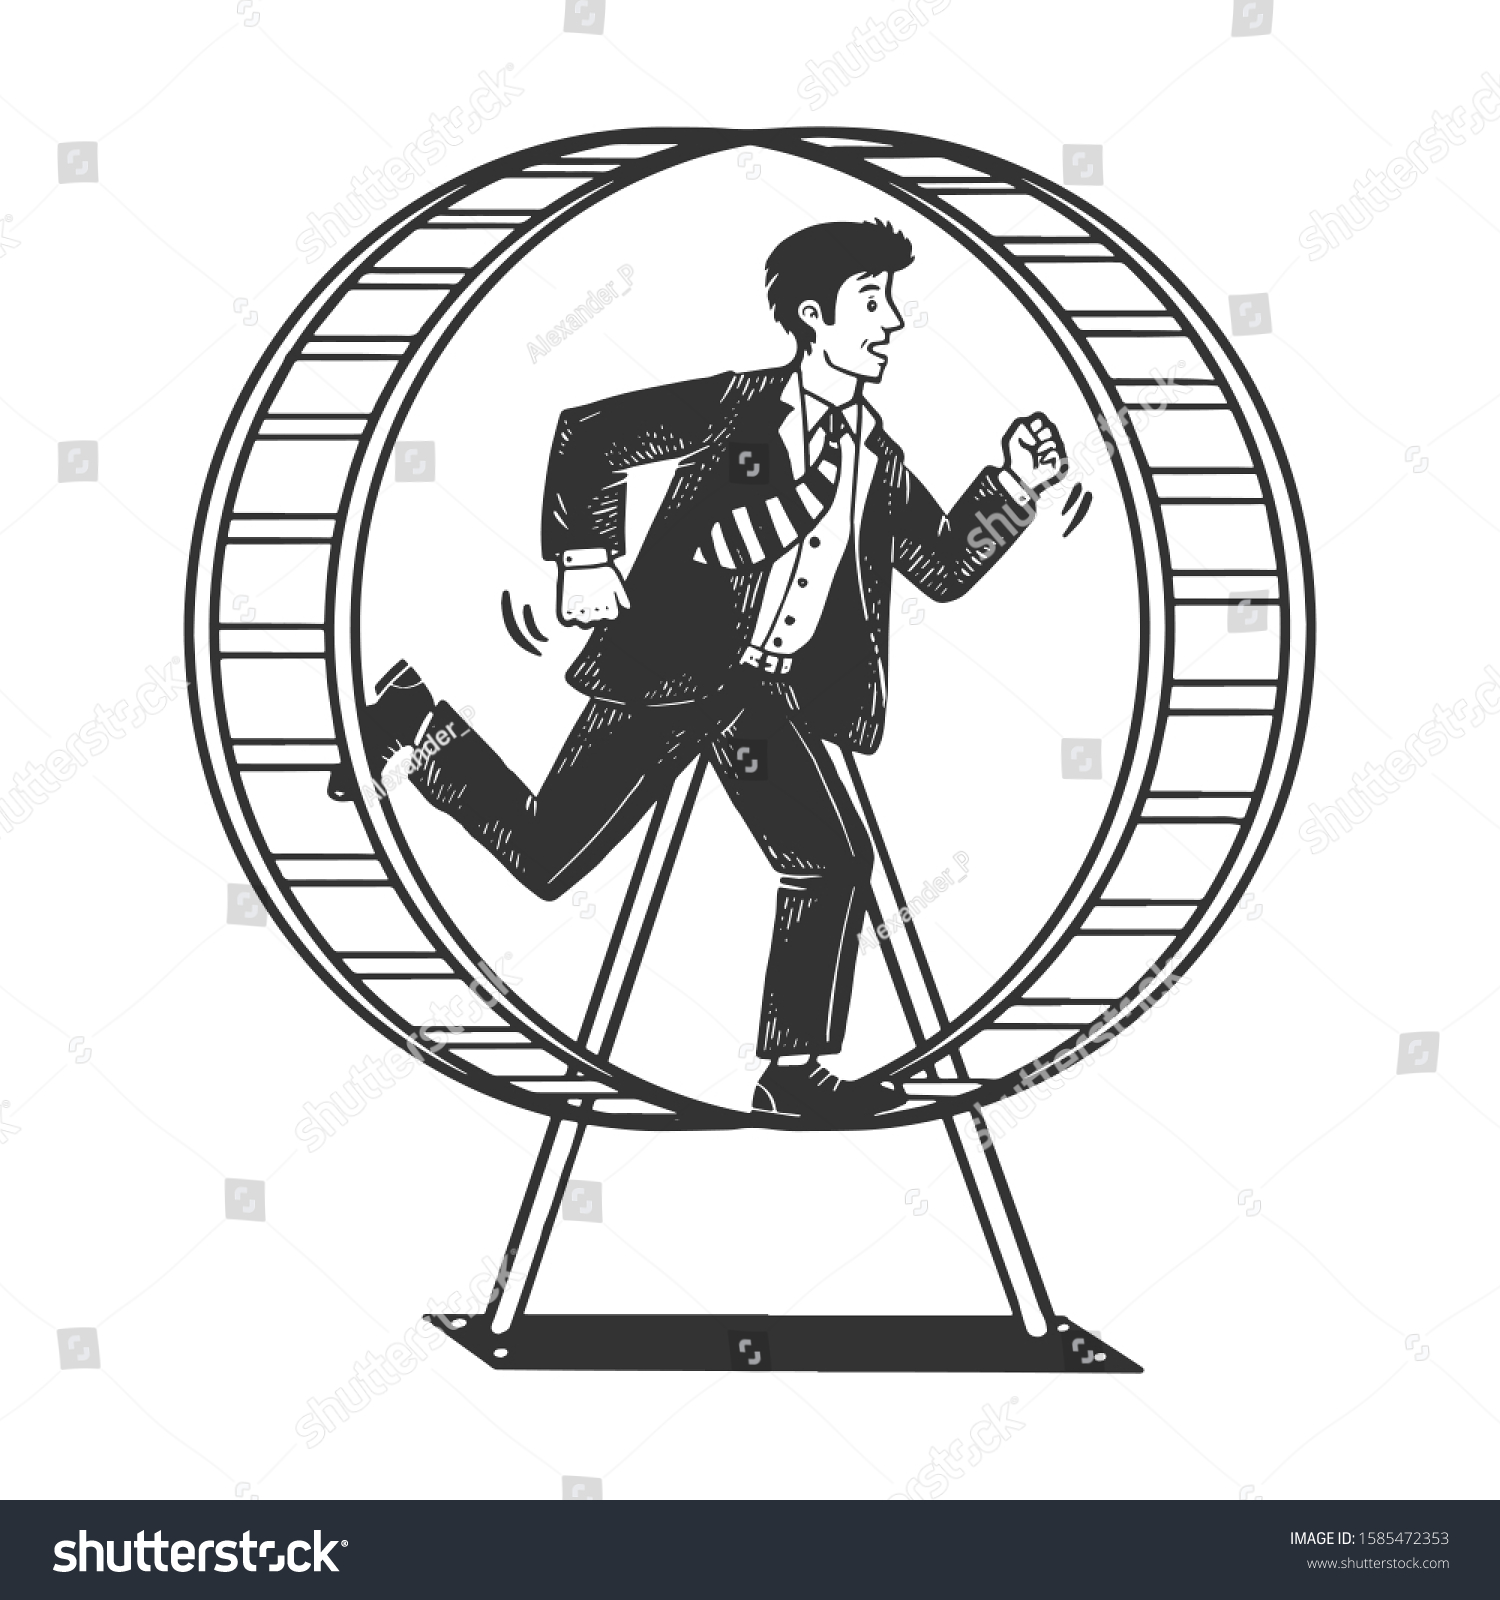 SVG of Businessman run in the hamster wheel sketch engraving vector illustration. Metaphor of useless work. T-shirt apparel print design. Scratch board style imitation. Black and white hand drawn image. svg